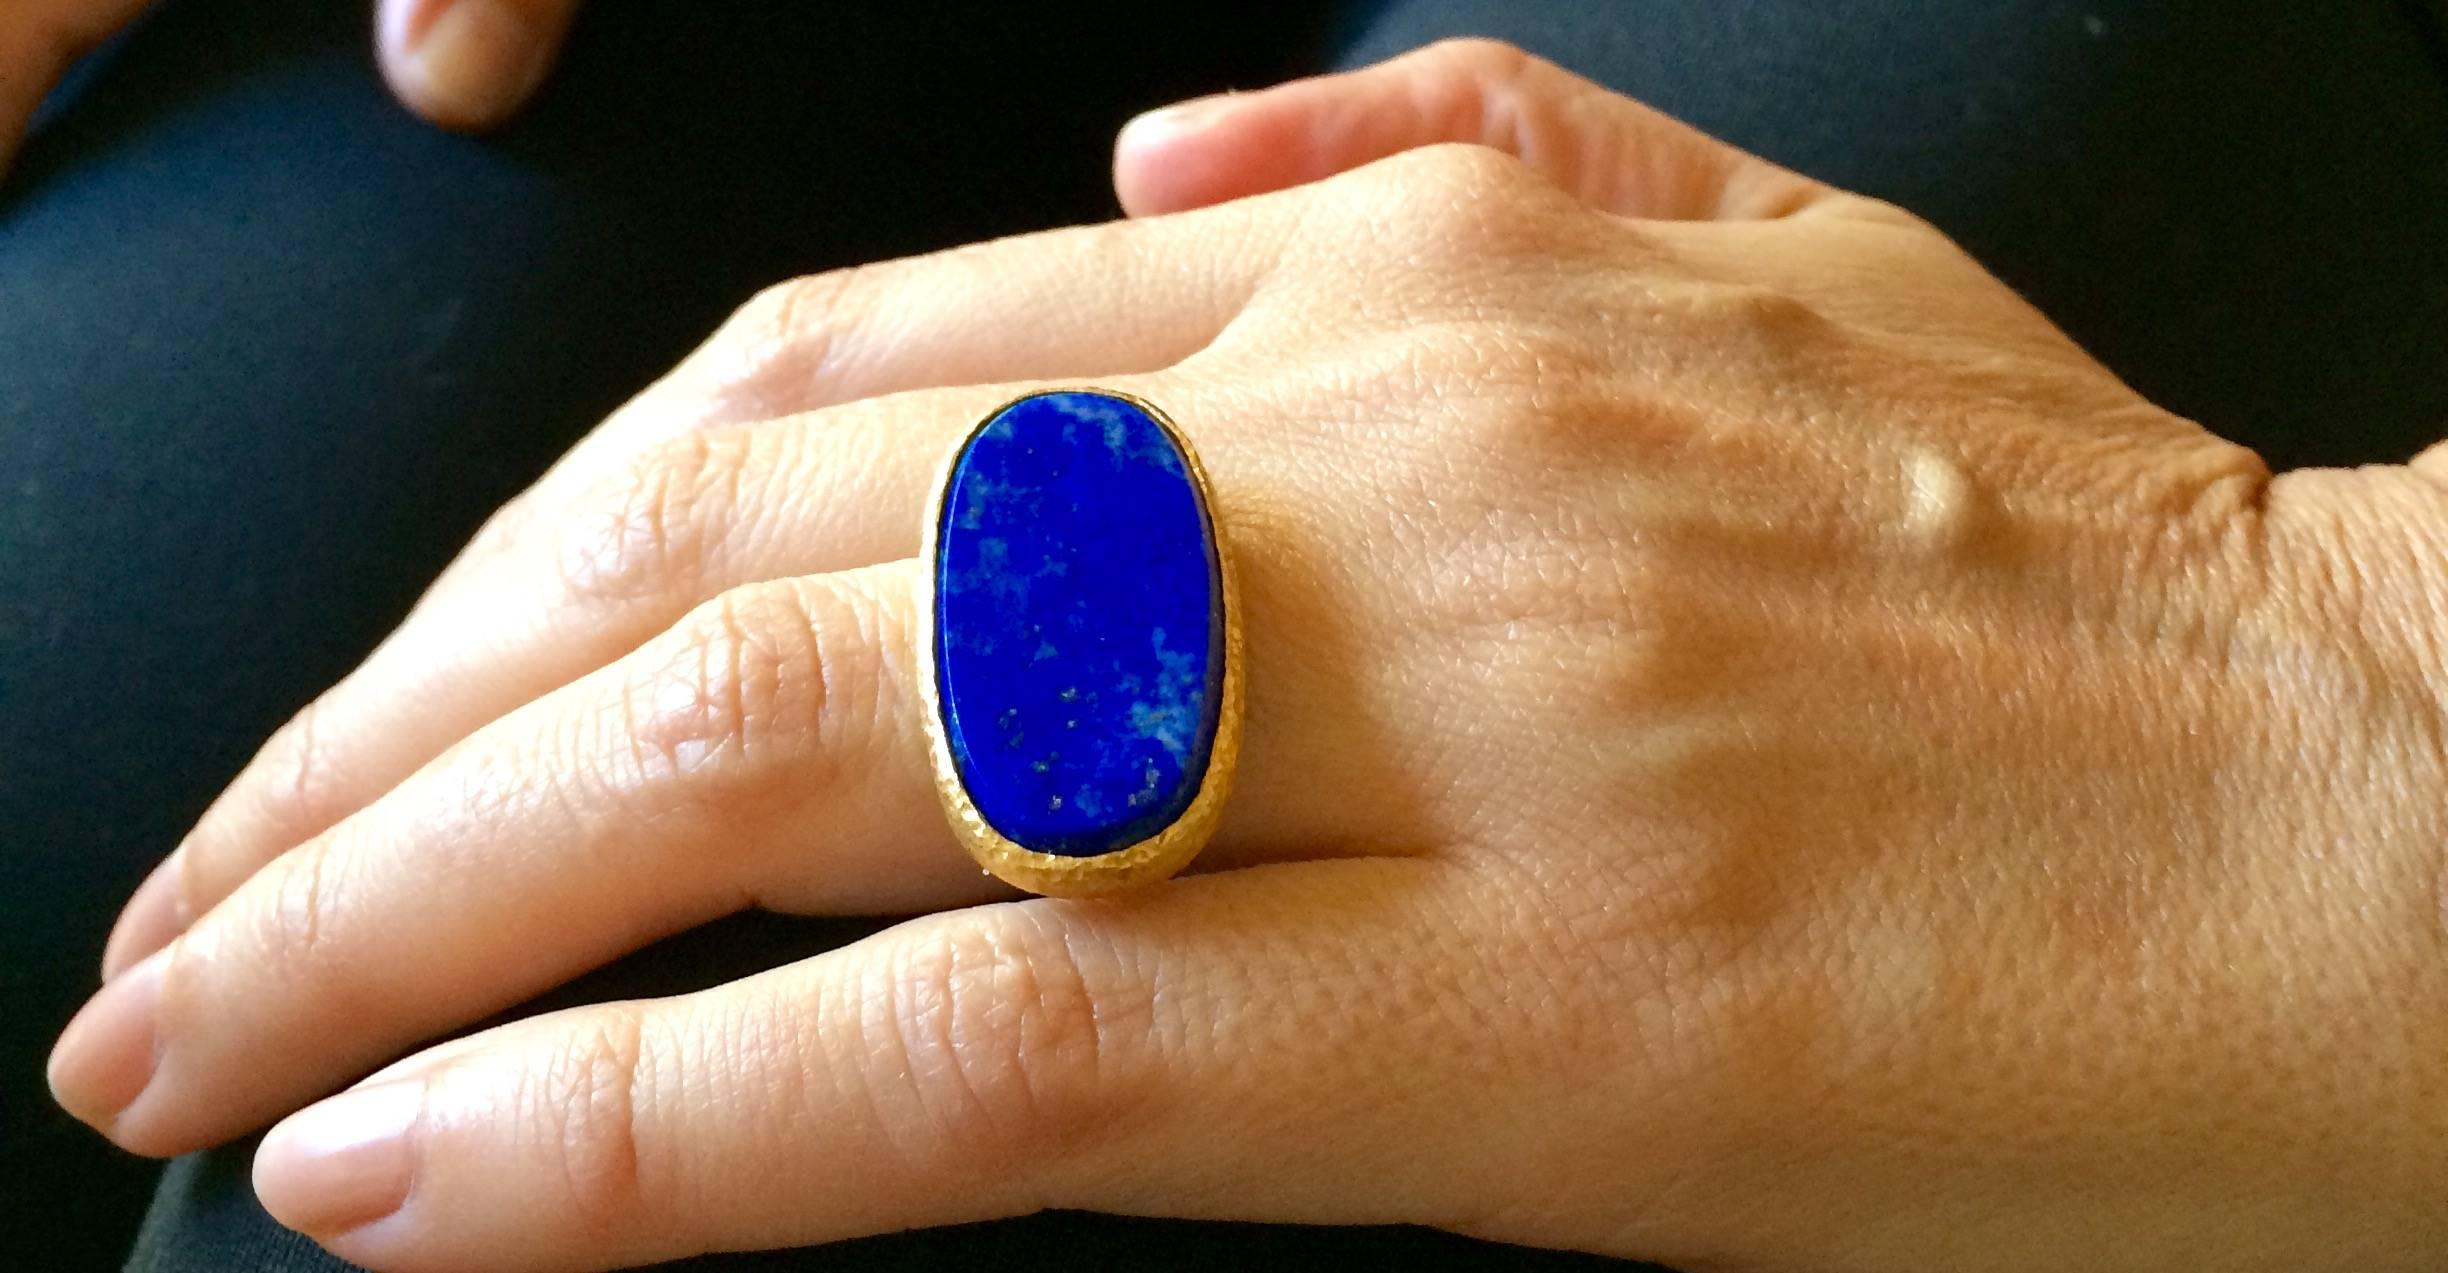 Large Oval Lapis Lazuli Stone In Hand Hammered Gold Ring By Marina J. 2016 3